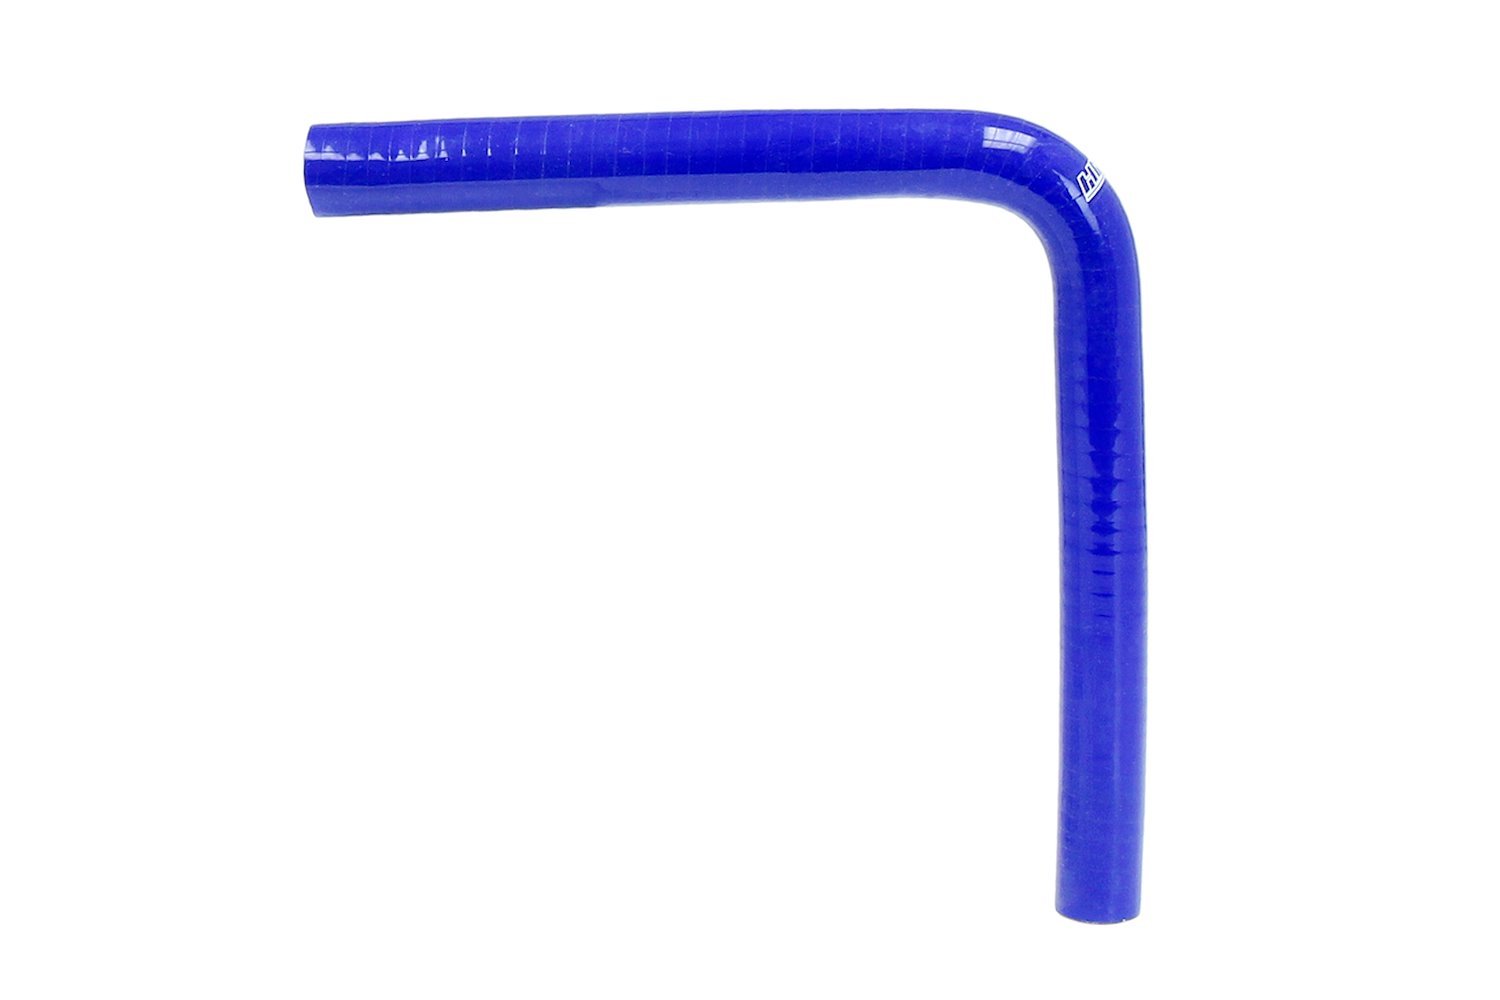 HTSEC90-125-L10-BLUE Silicone 90-Degree Elbow Hose, High-Temp 4-Ply Reinforced, 1-1/4 in. ID, 10 in. Leg, Blue